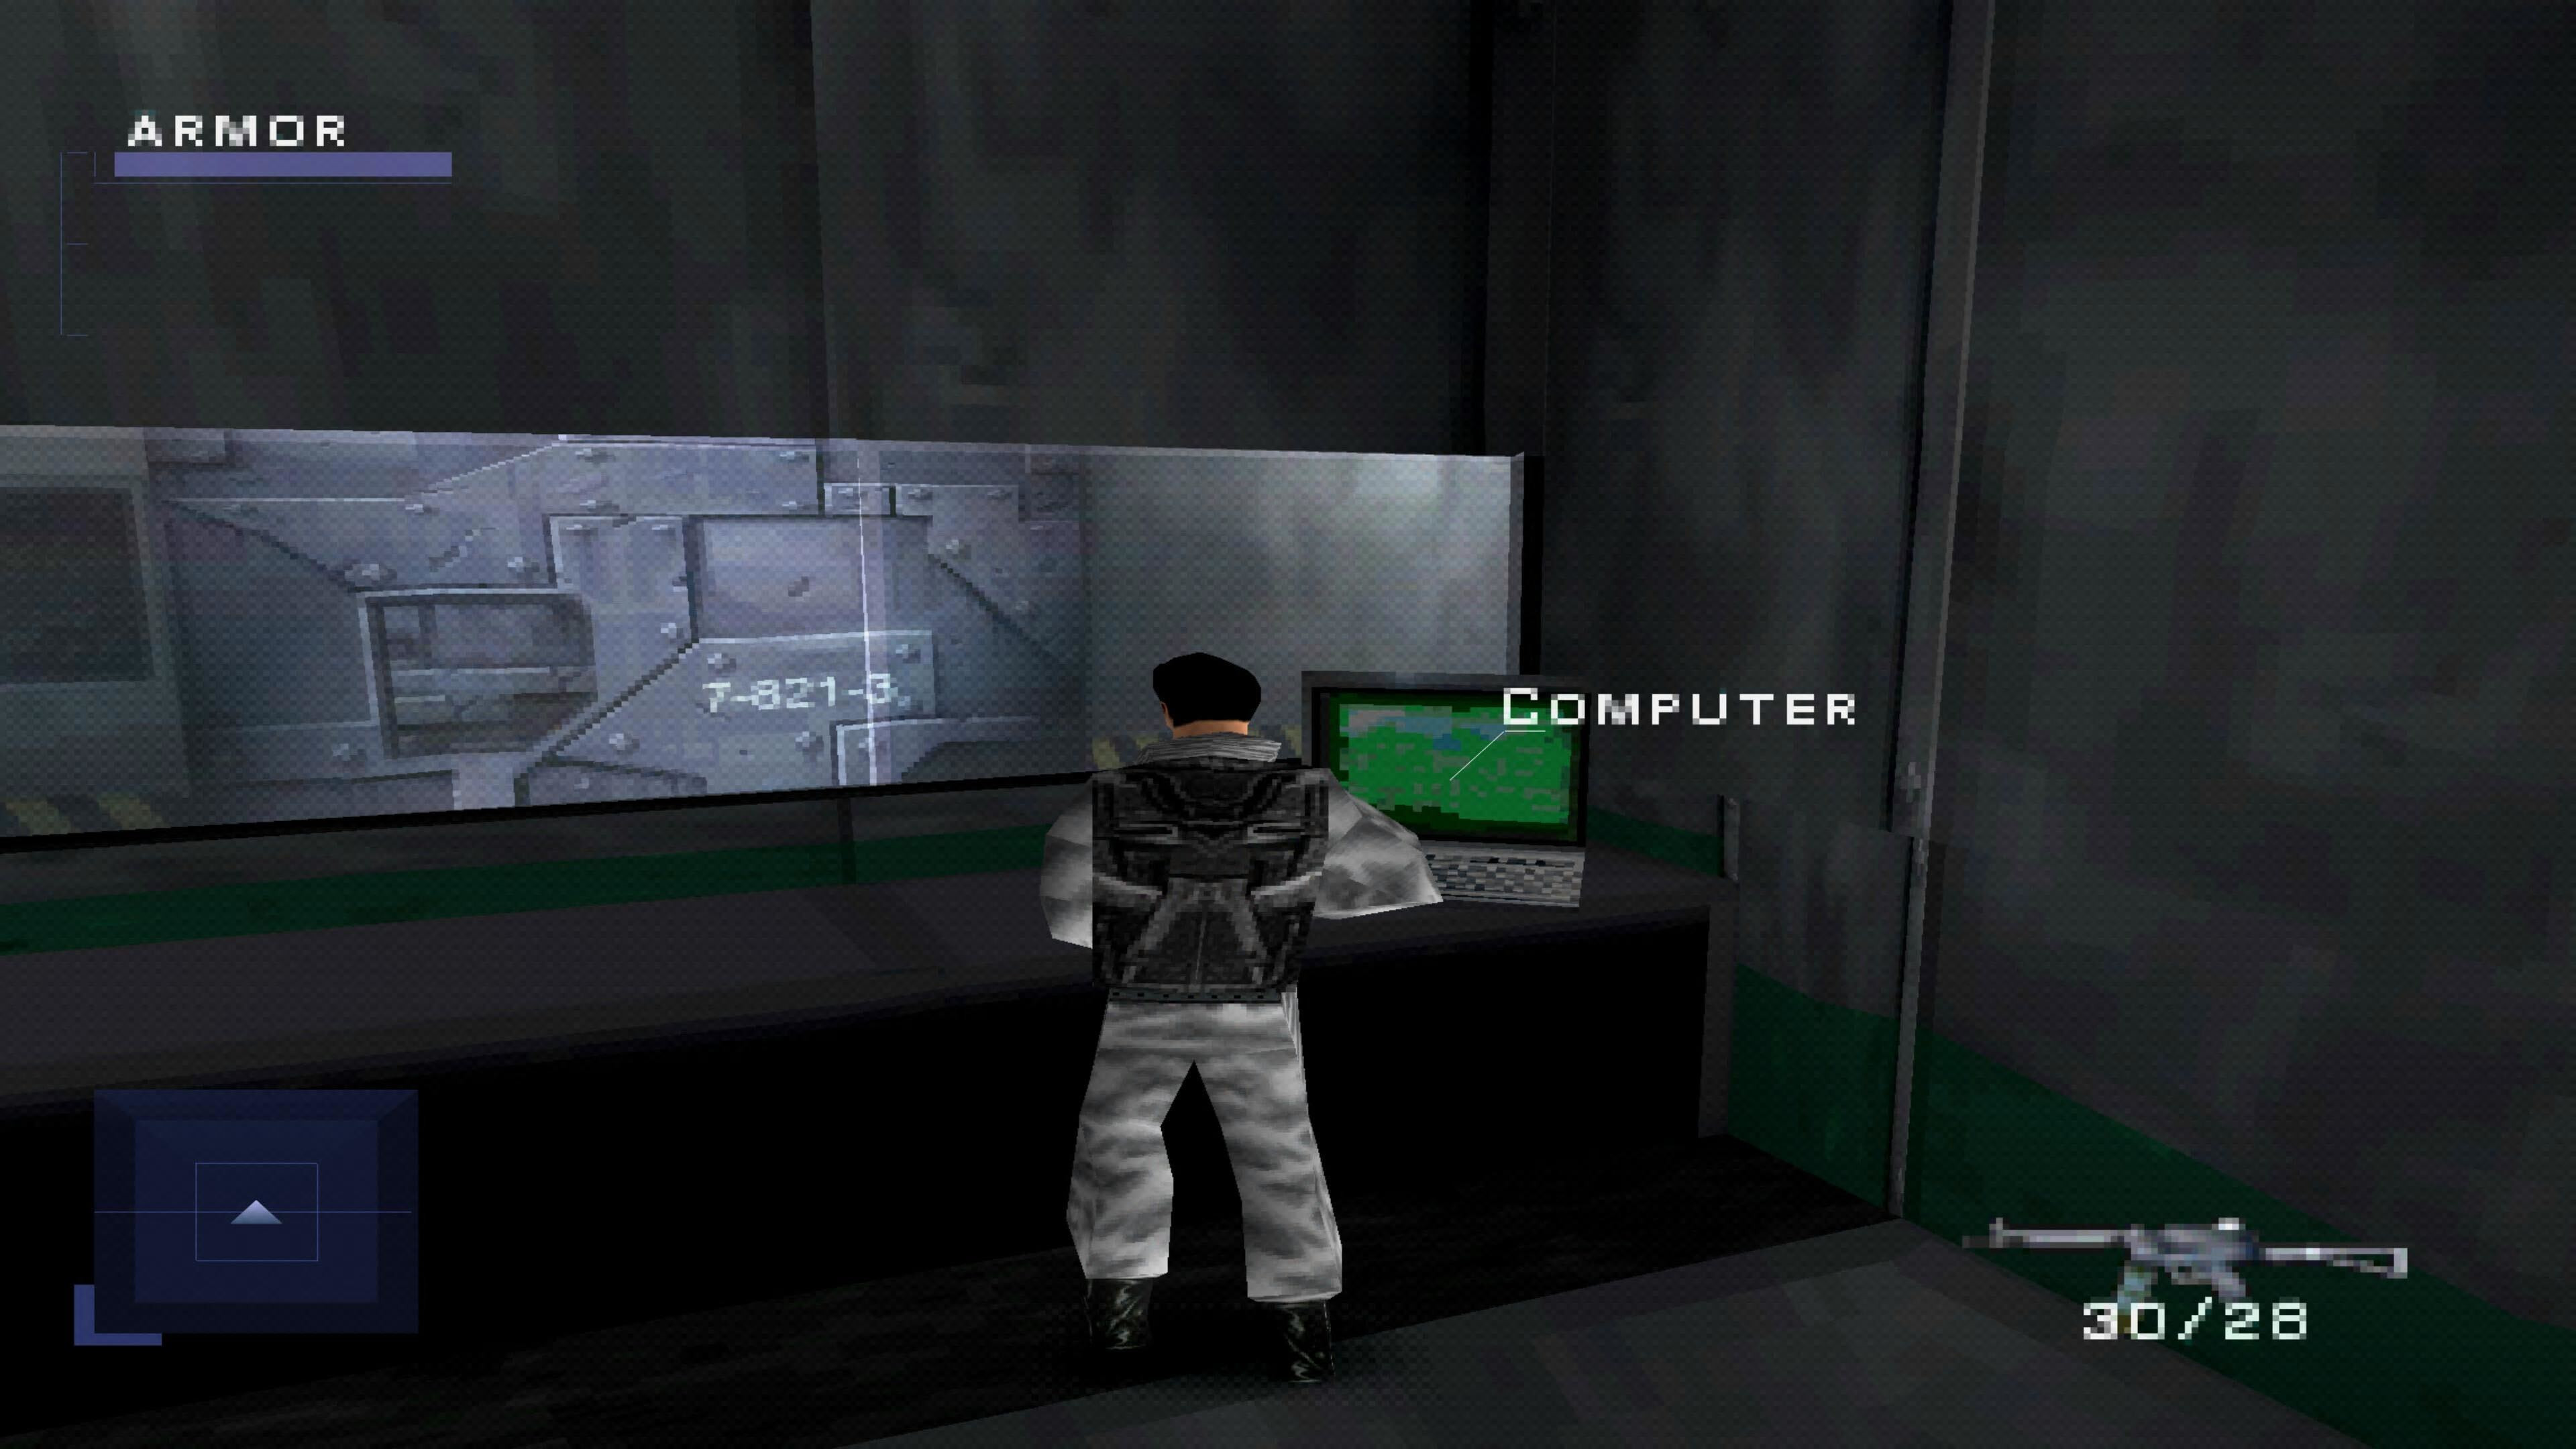 PS1 classic Syphon Filter will have trophy support on new PS Plus